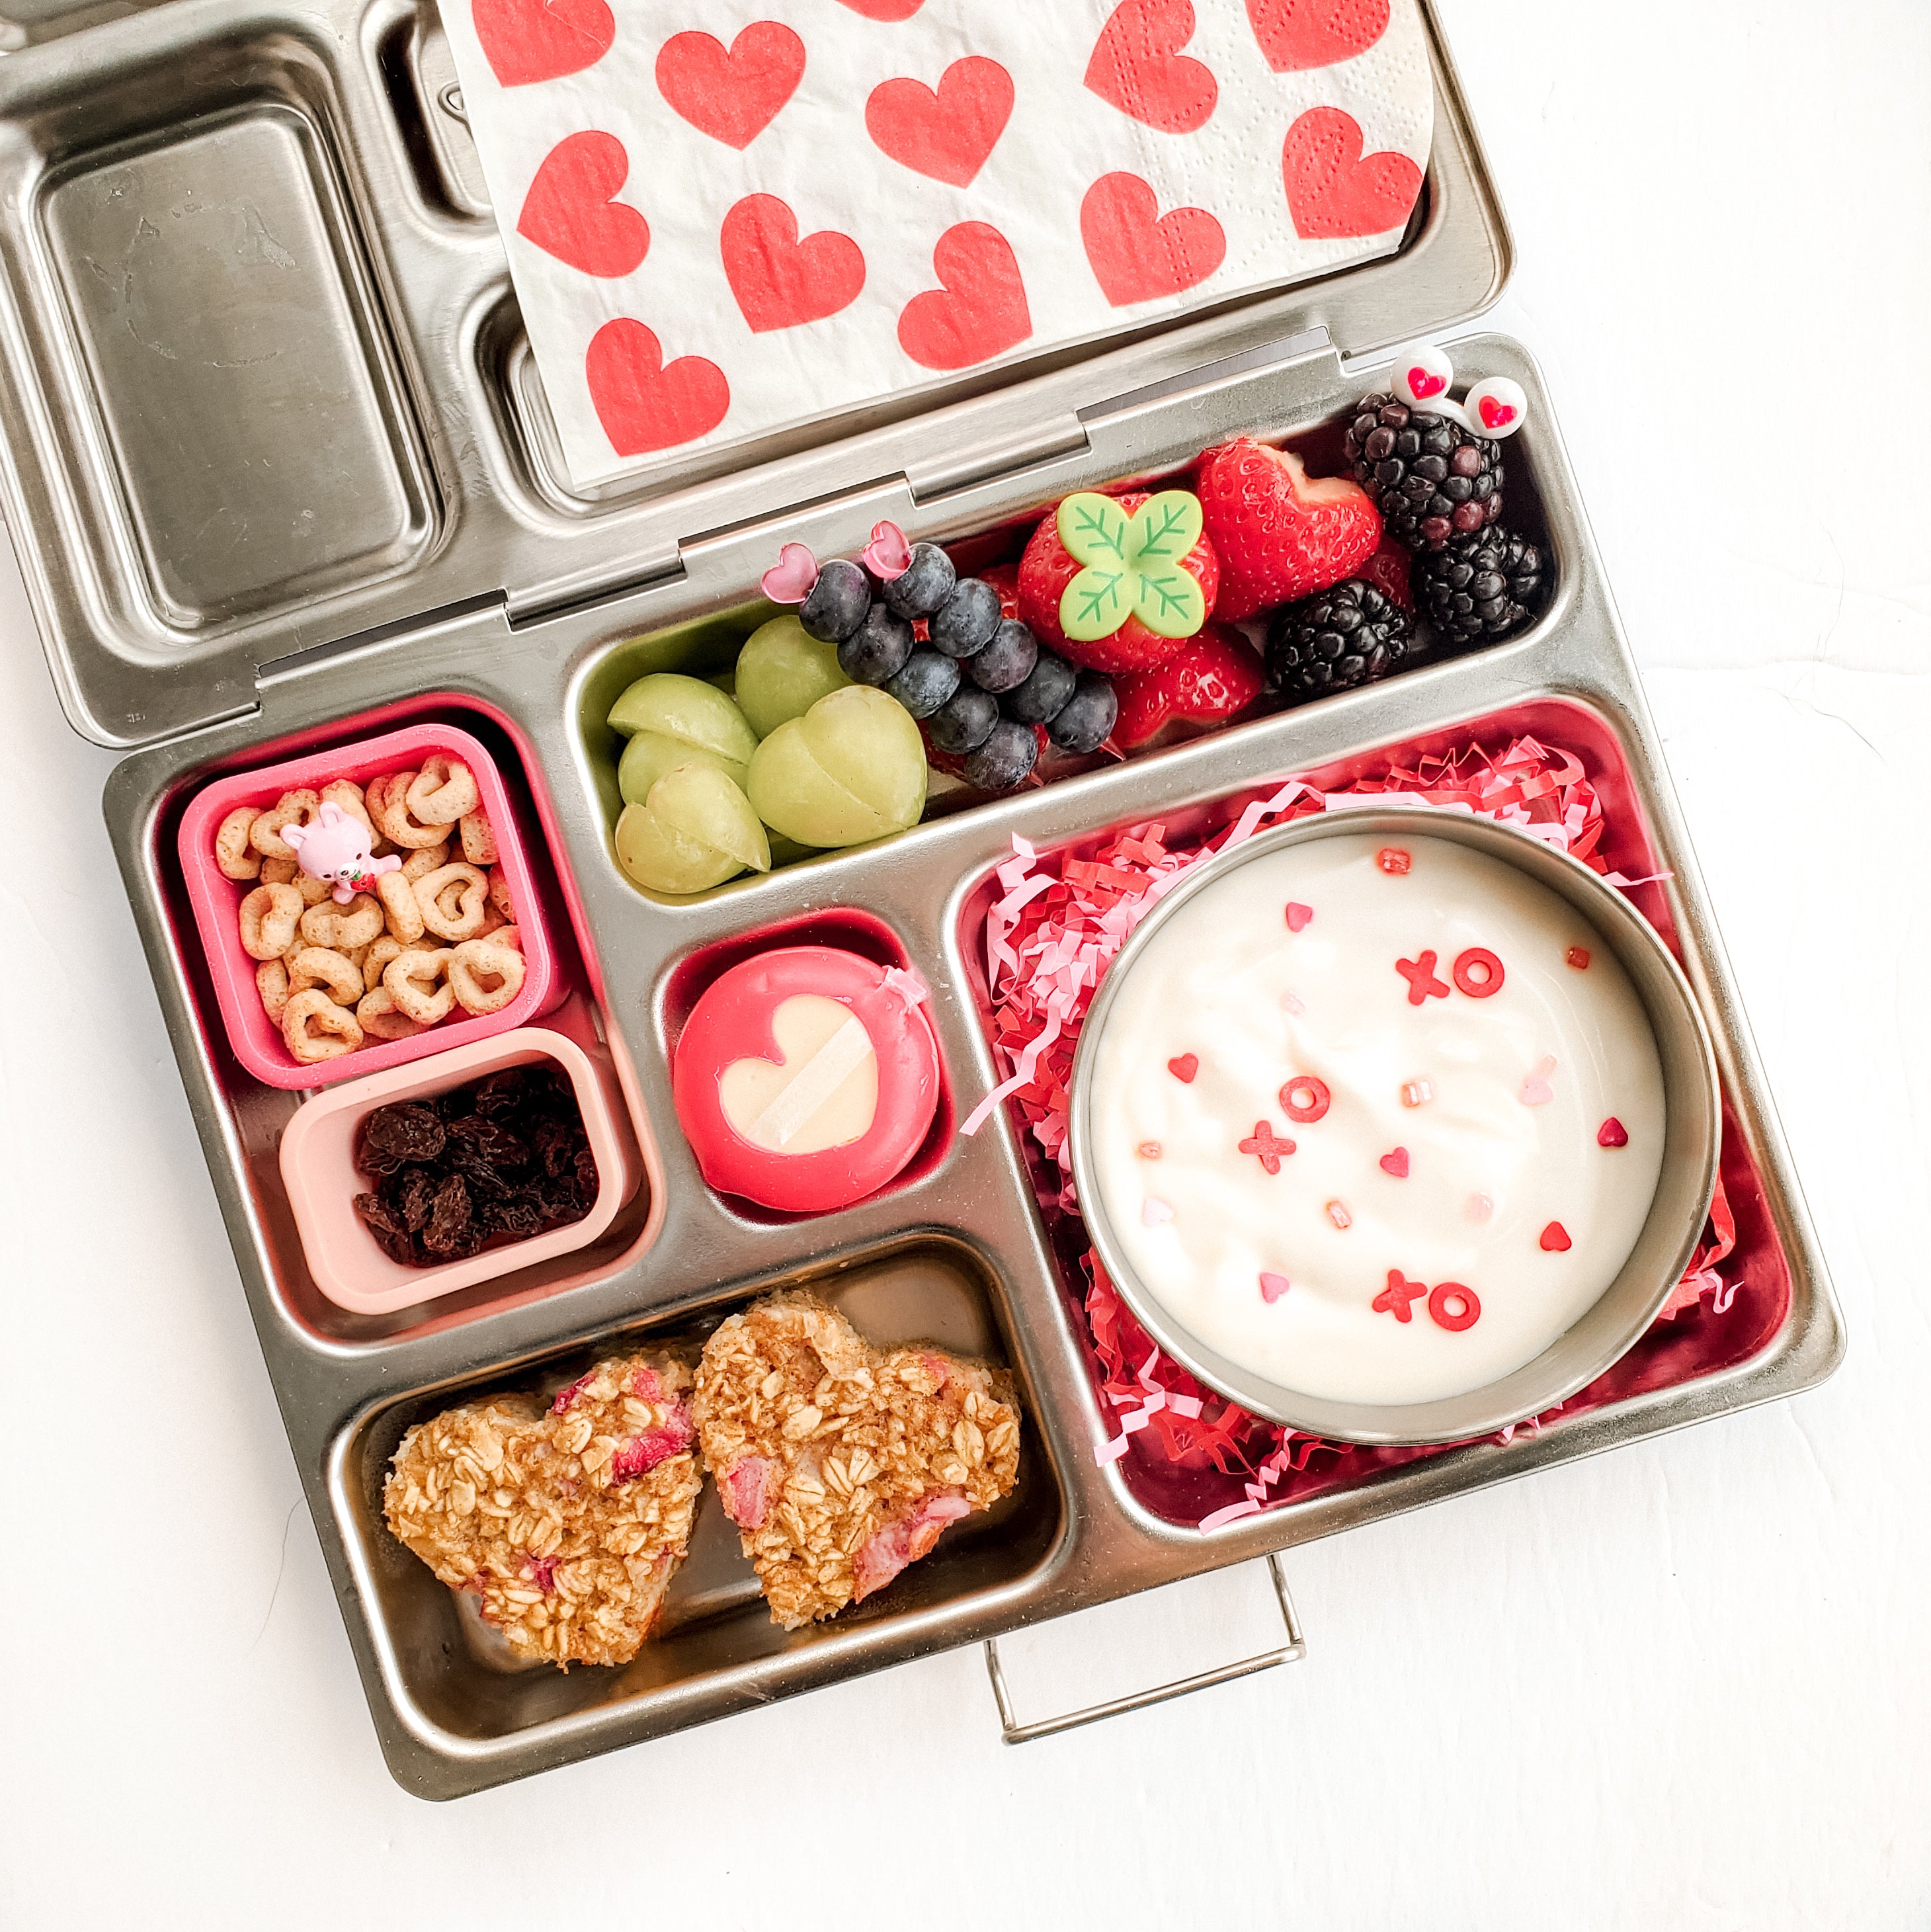 Strawberry Patch Lunch Box